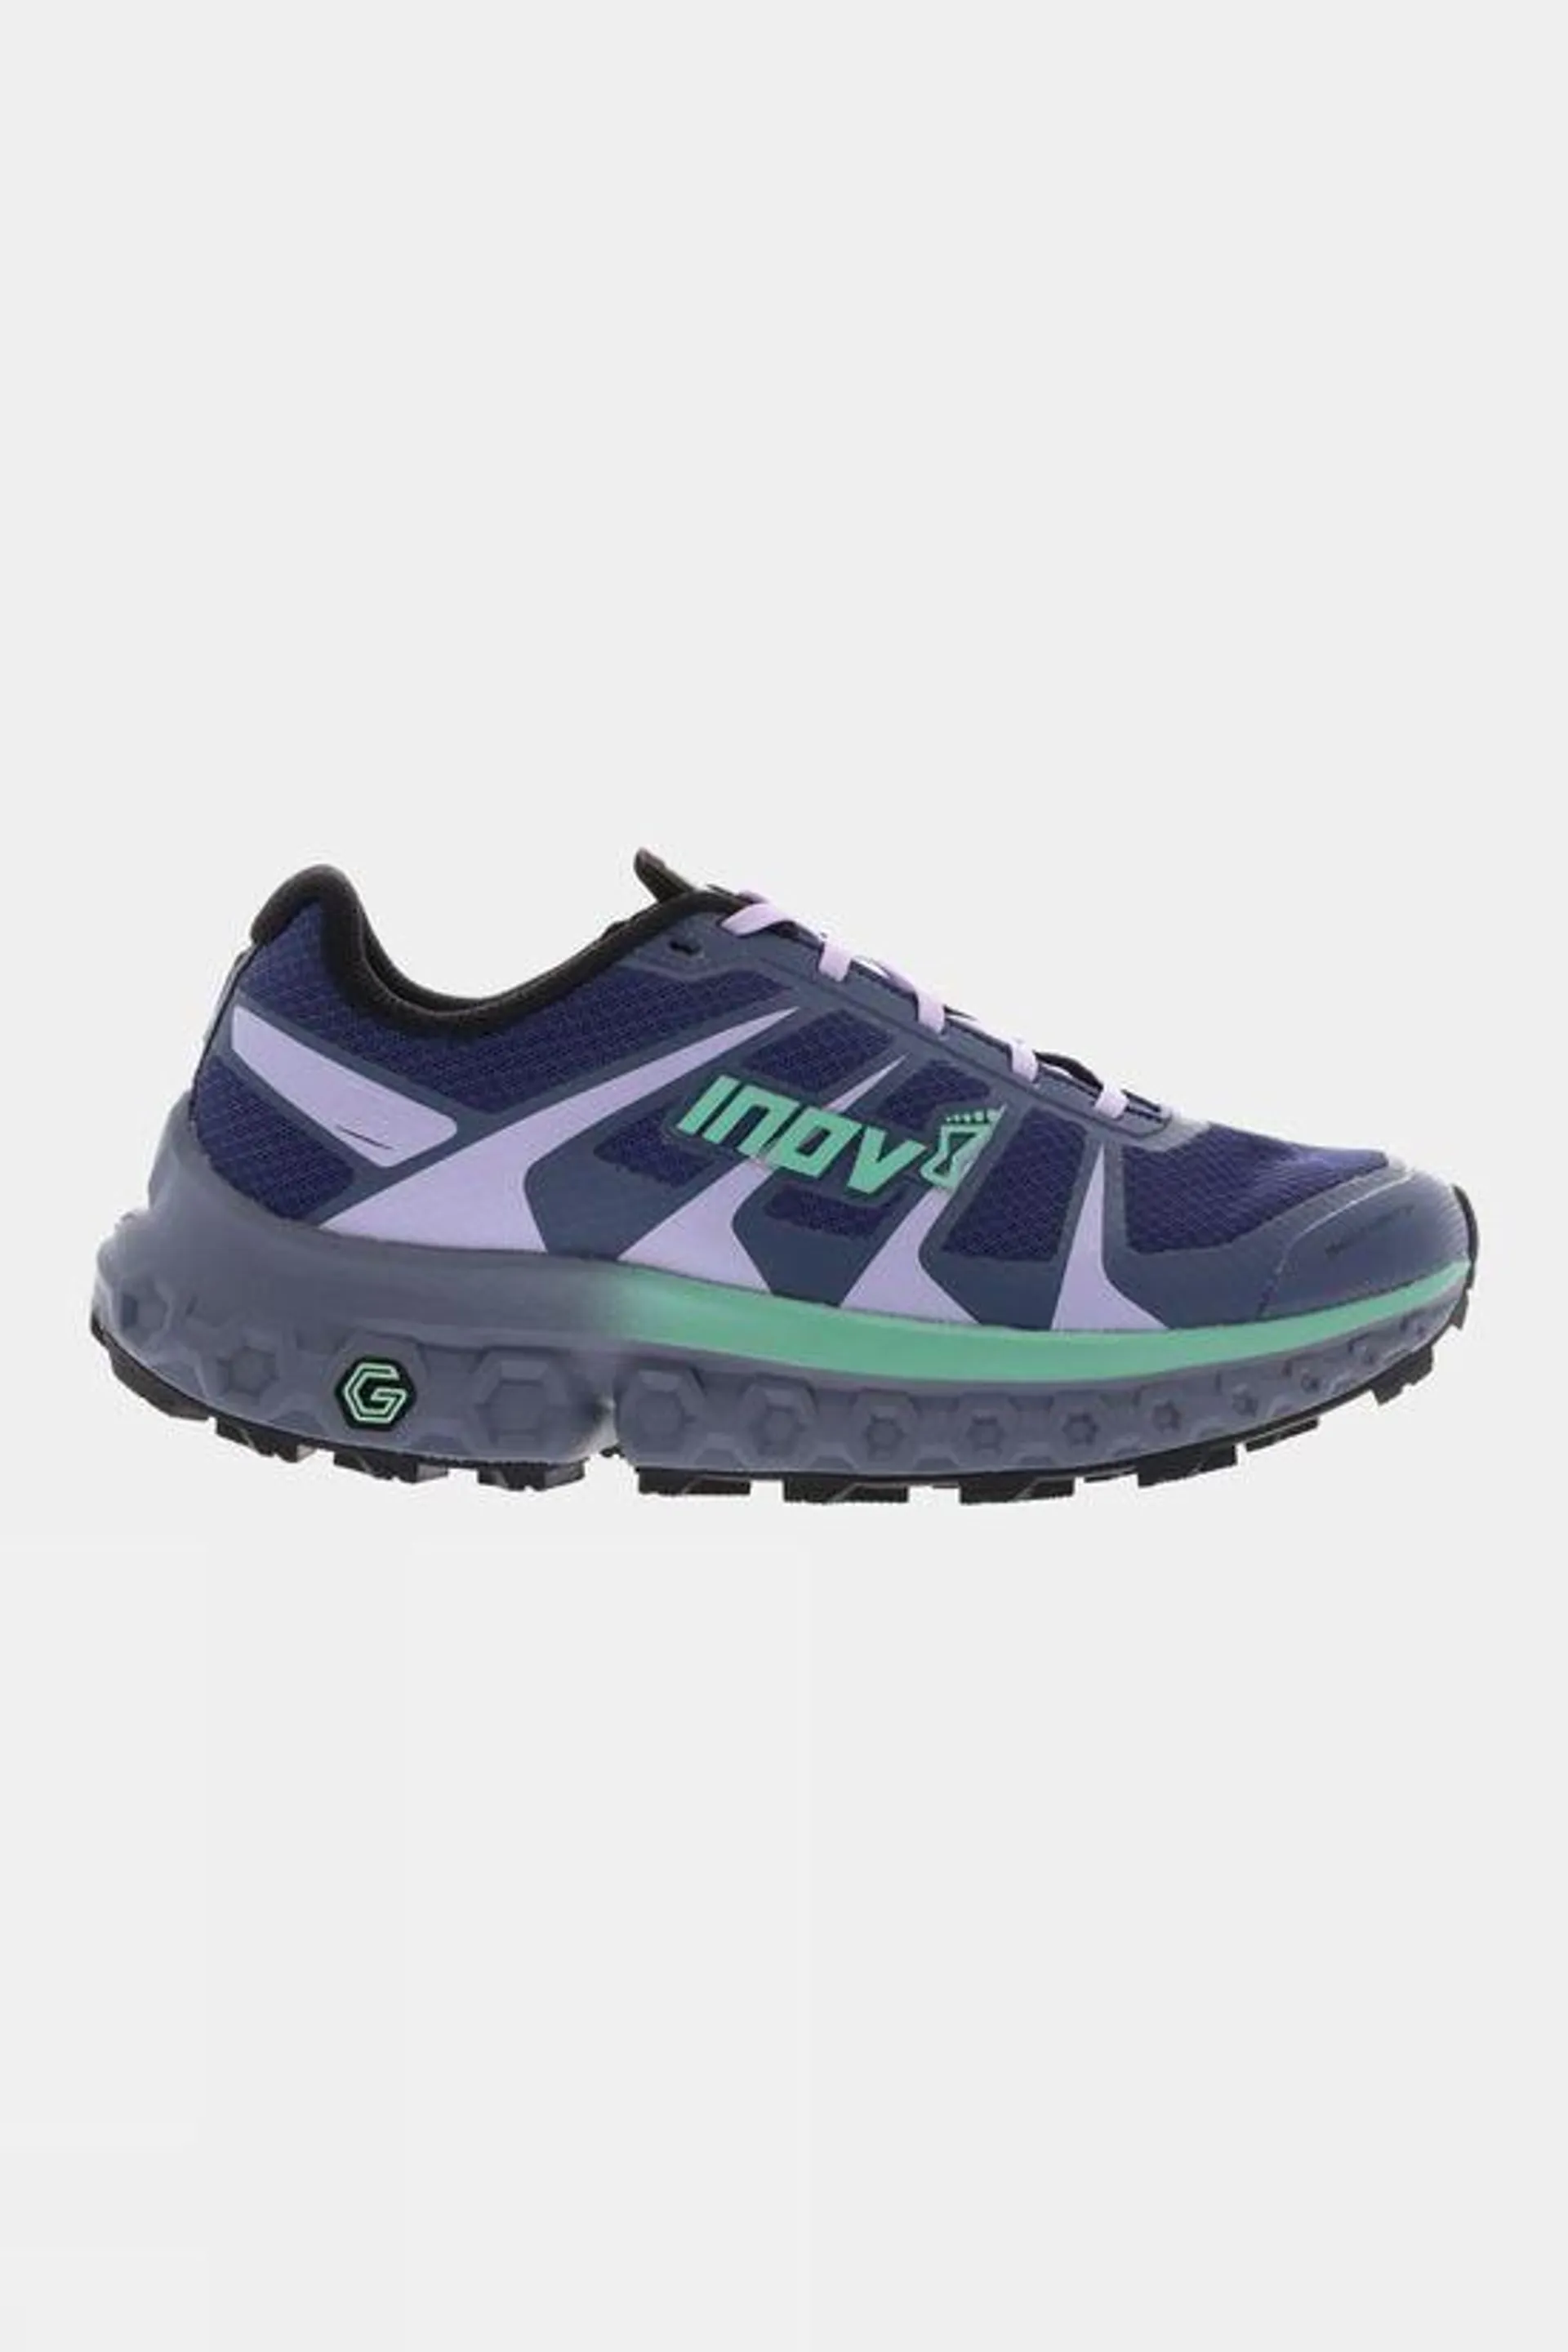 Womens TrailFly Ultra G300 Max Shoes